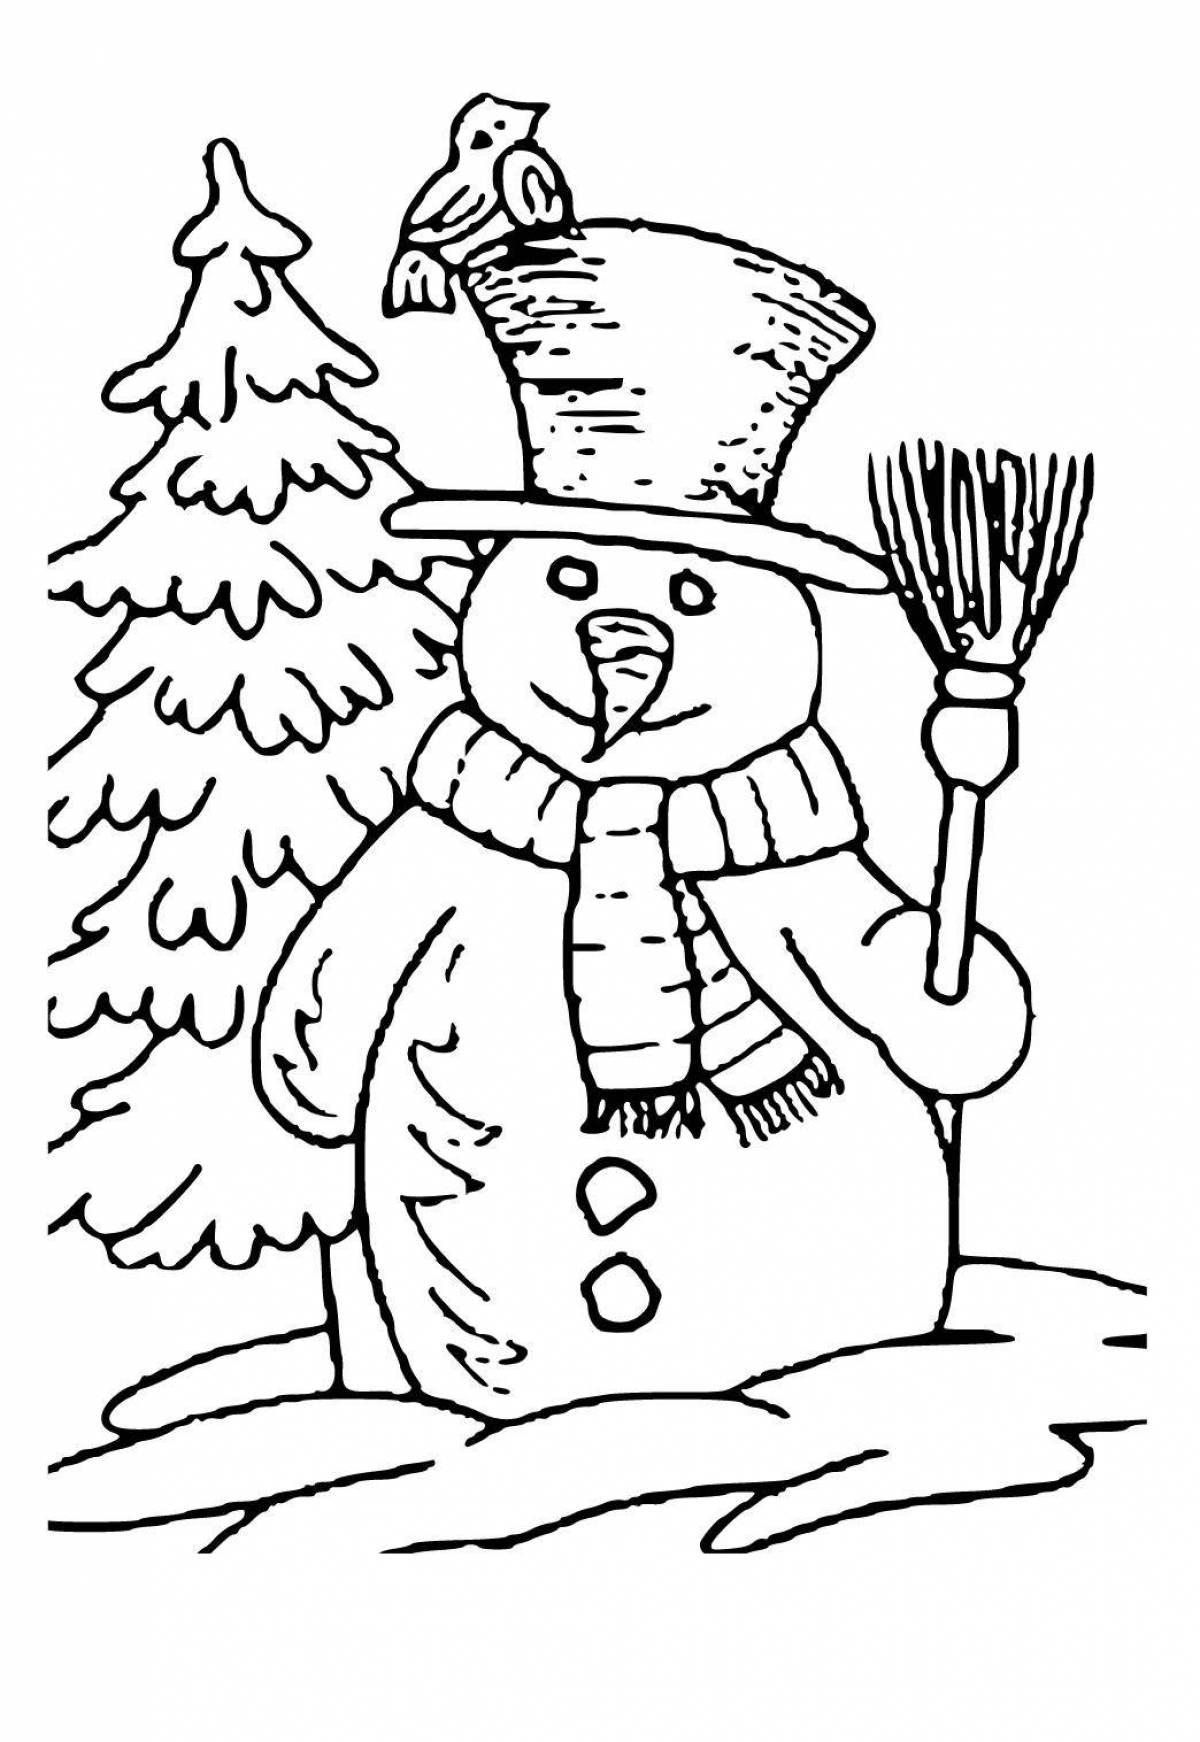 A fun December coloring book for kids